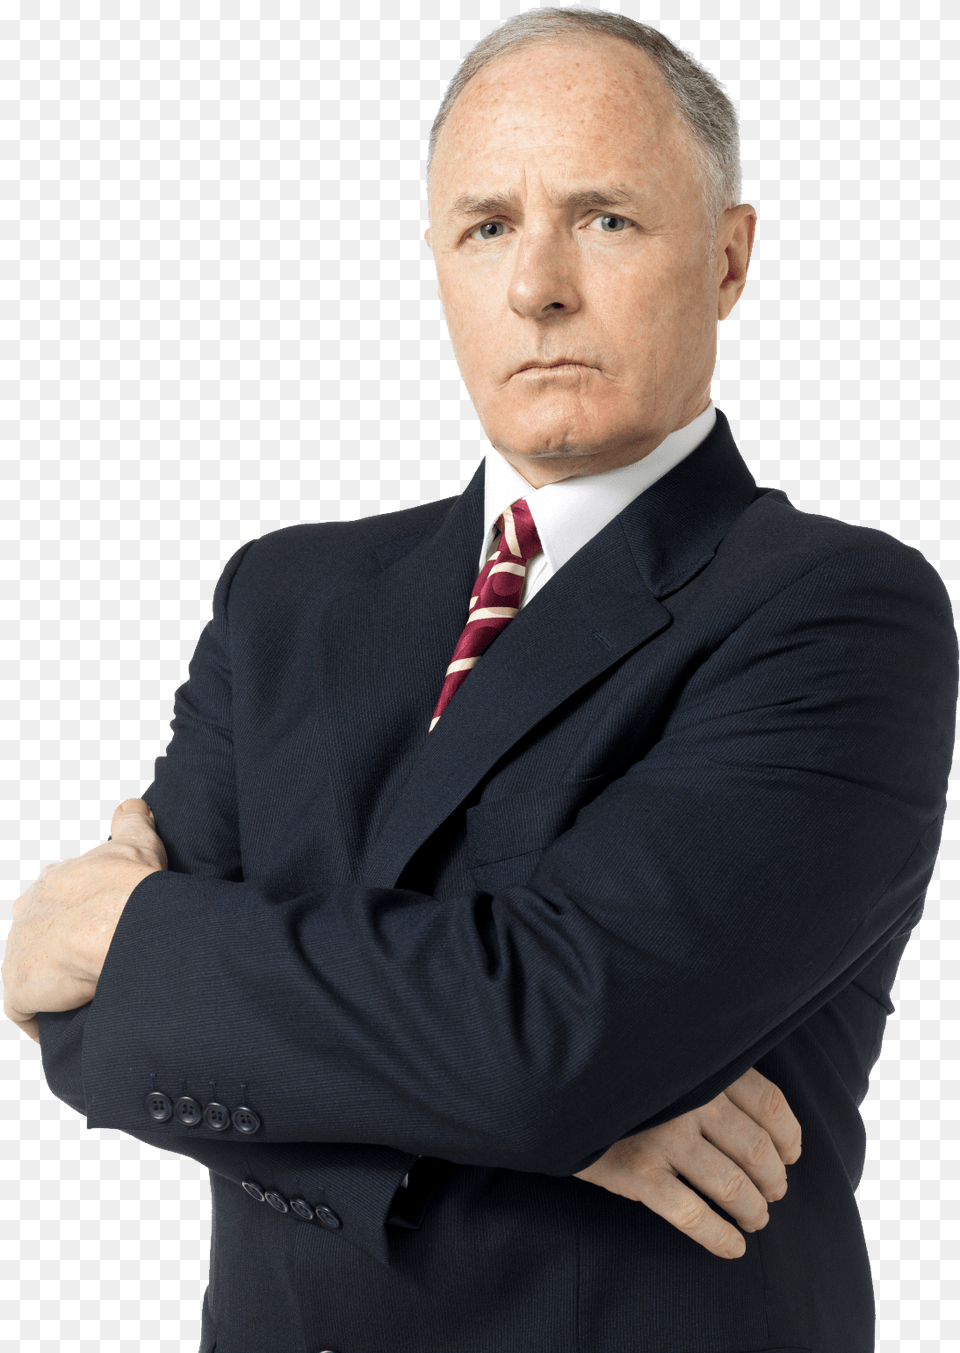 Angry Person Men Without Socks Meme, Accessories, Jacket, Formal Wear, Suit Free Transparent Png